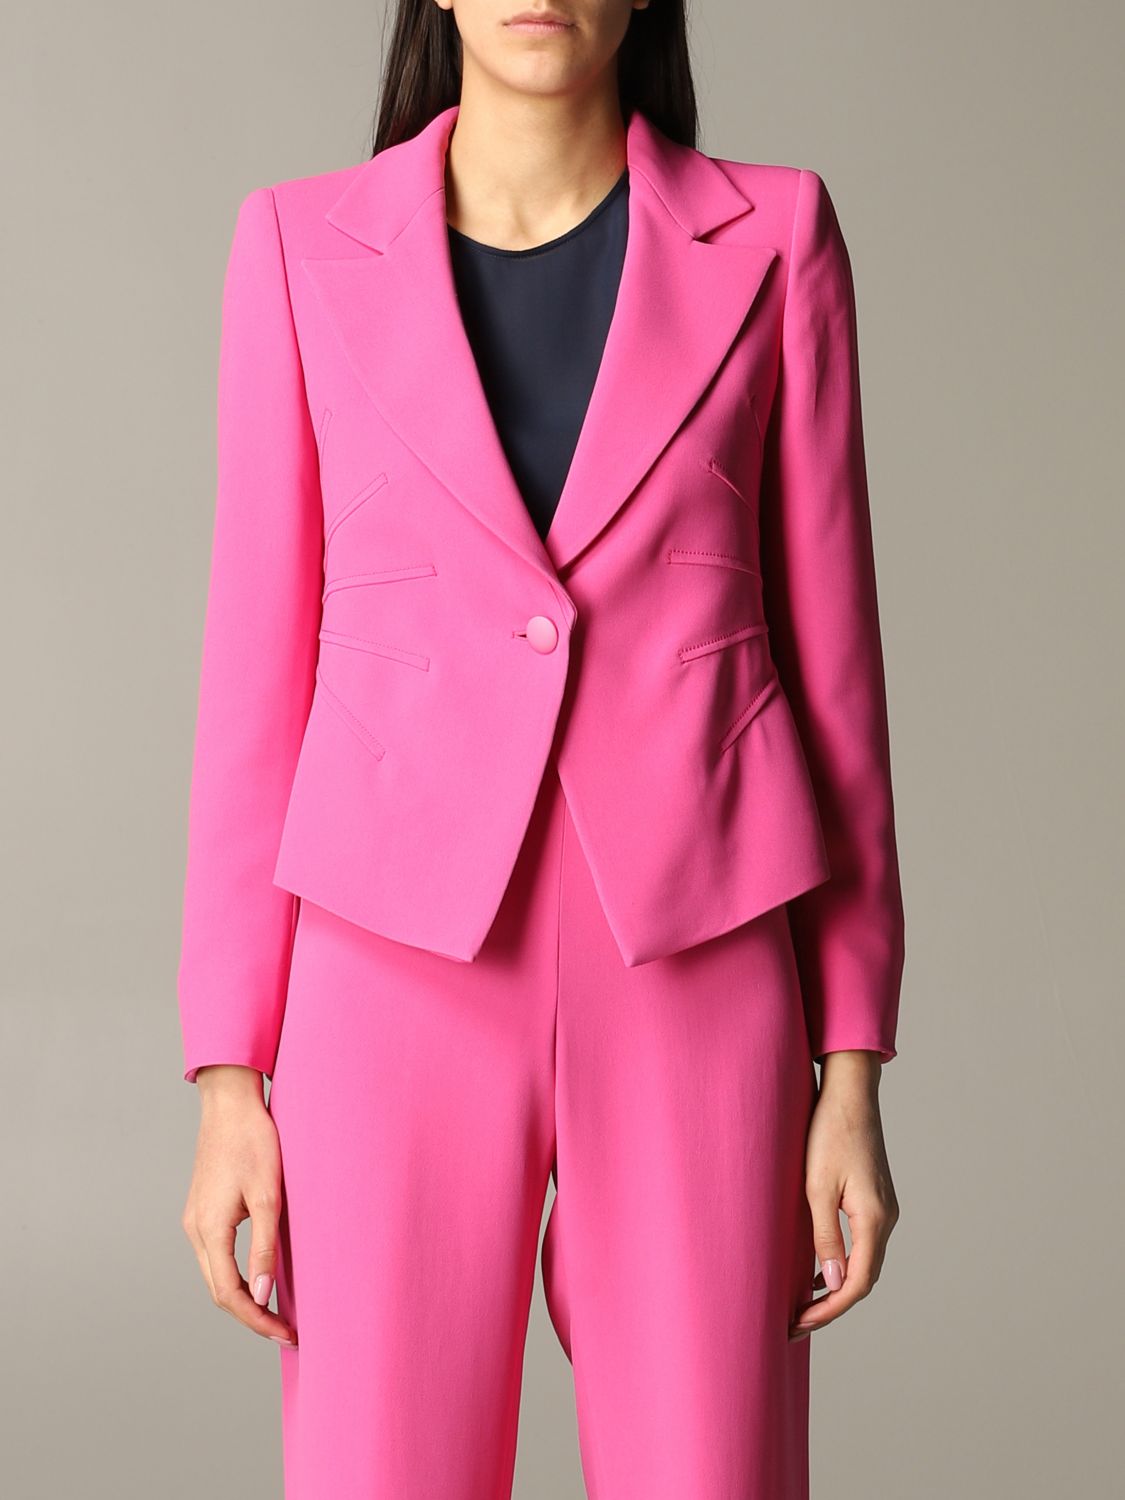 Emporio Armani Outlet: single-breasted jacket - Pink | Emporio Armani suit  5NG38T 52013 online on 